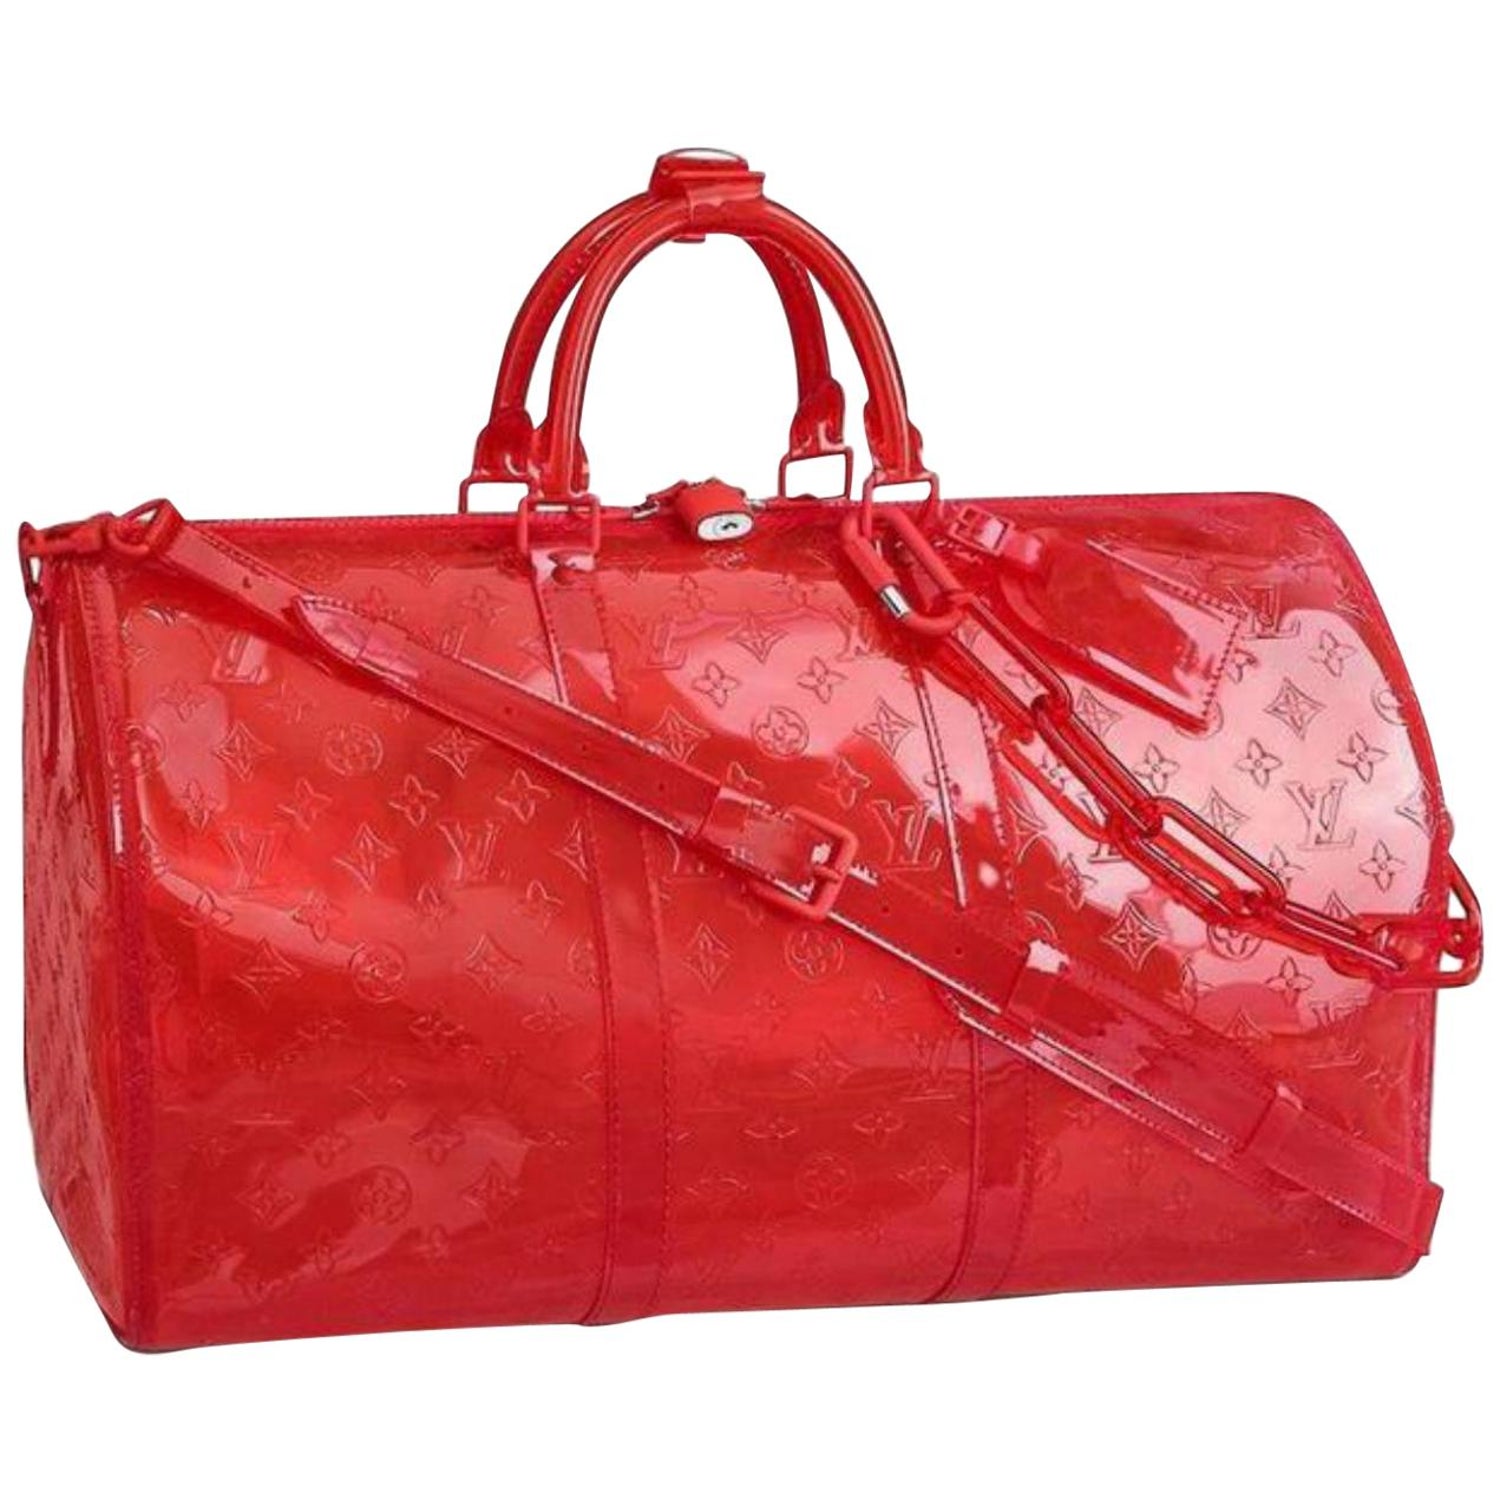 Clear Louis Vuitton Keepall - 7 For Sale on 1stDibs  clear lv duffle bag,  lv transparent duffle bag, louis vuitton clear duffle bag